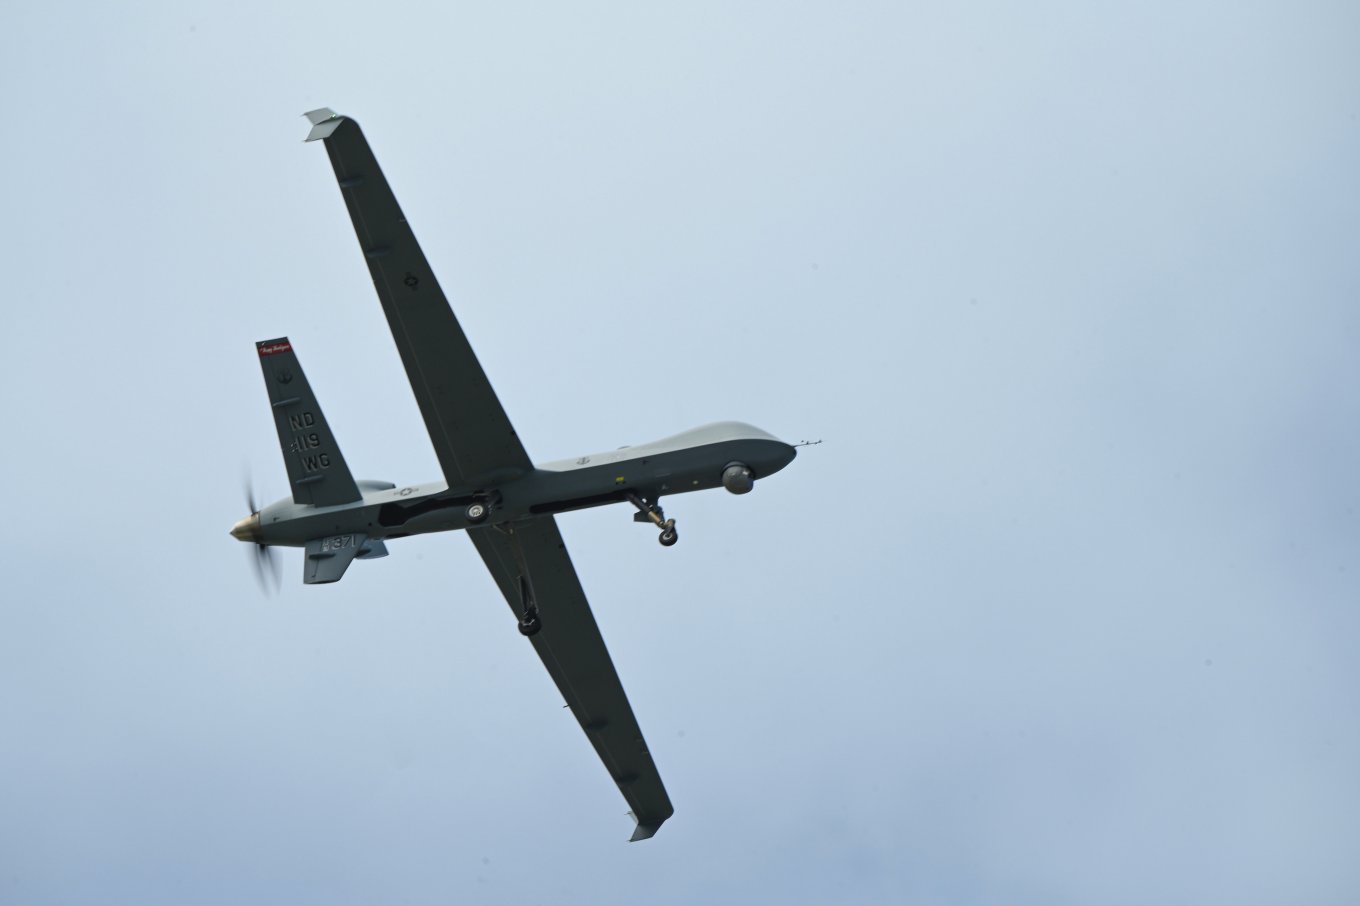 MQ-9 Reaper unmanned aerial vehicle, Is Loss of MQ-9 Reaper Critical for the US and Will the Russians Learn Something New Getting the UAV’s Wreckage, Defense Express